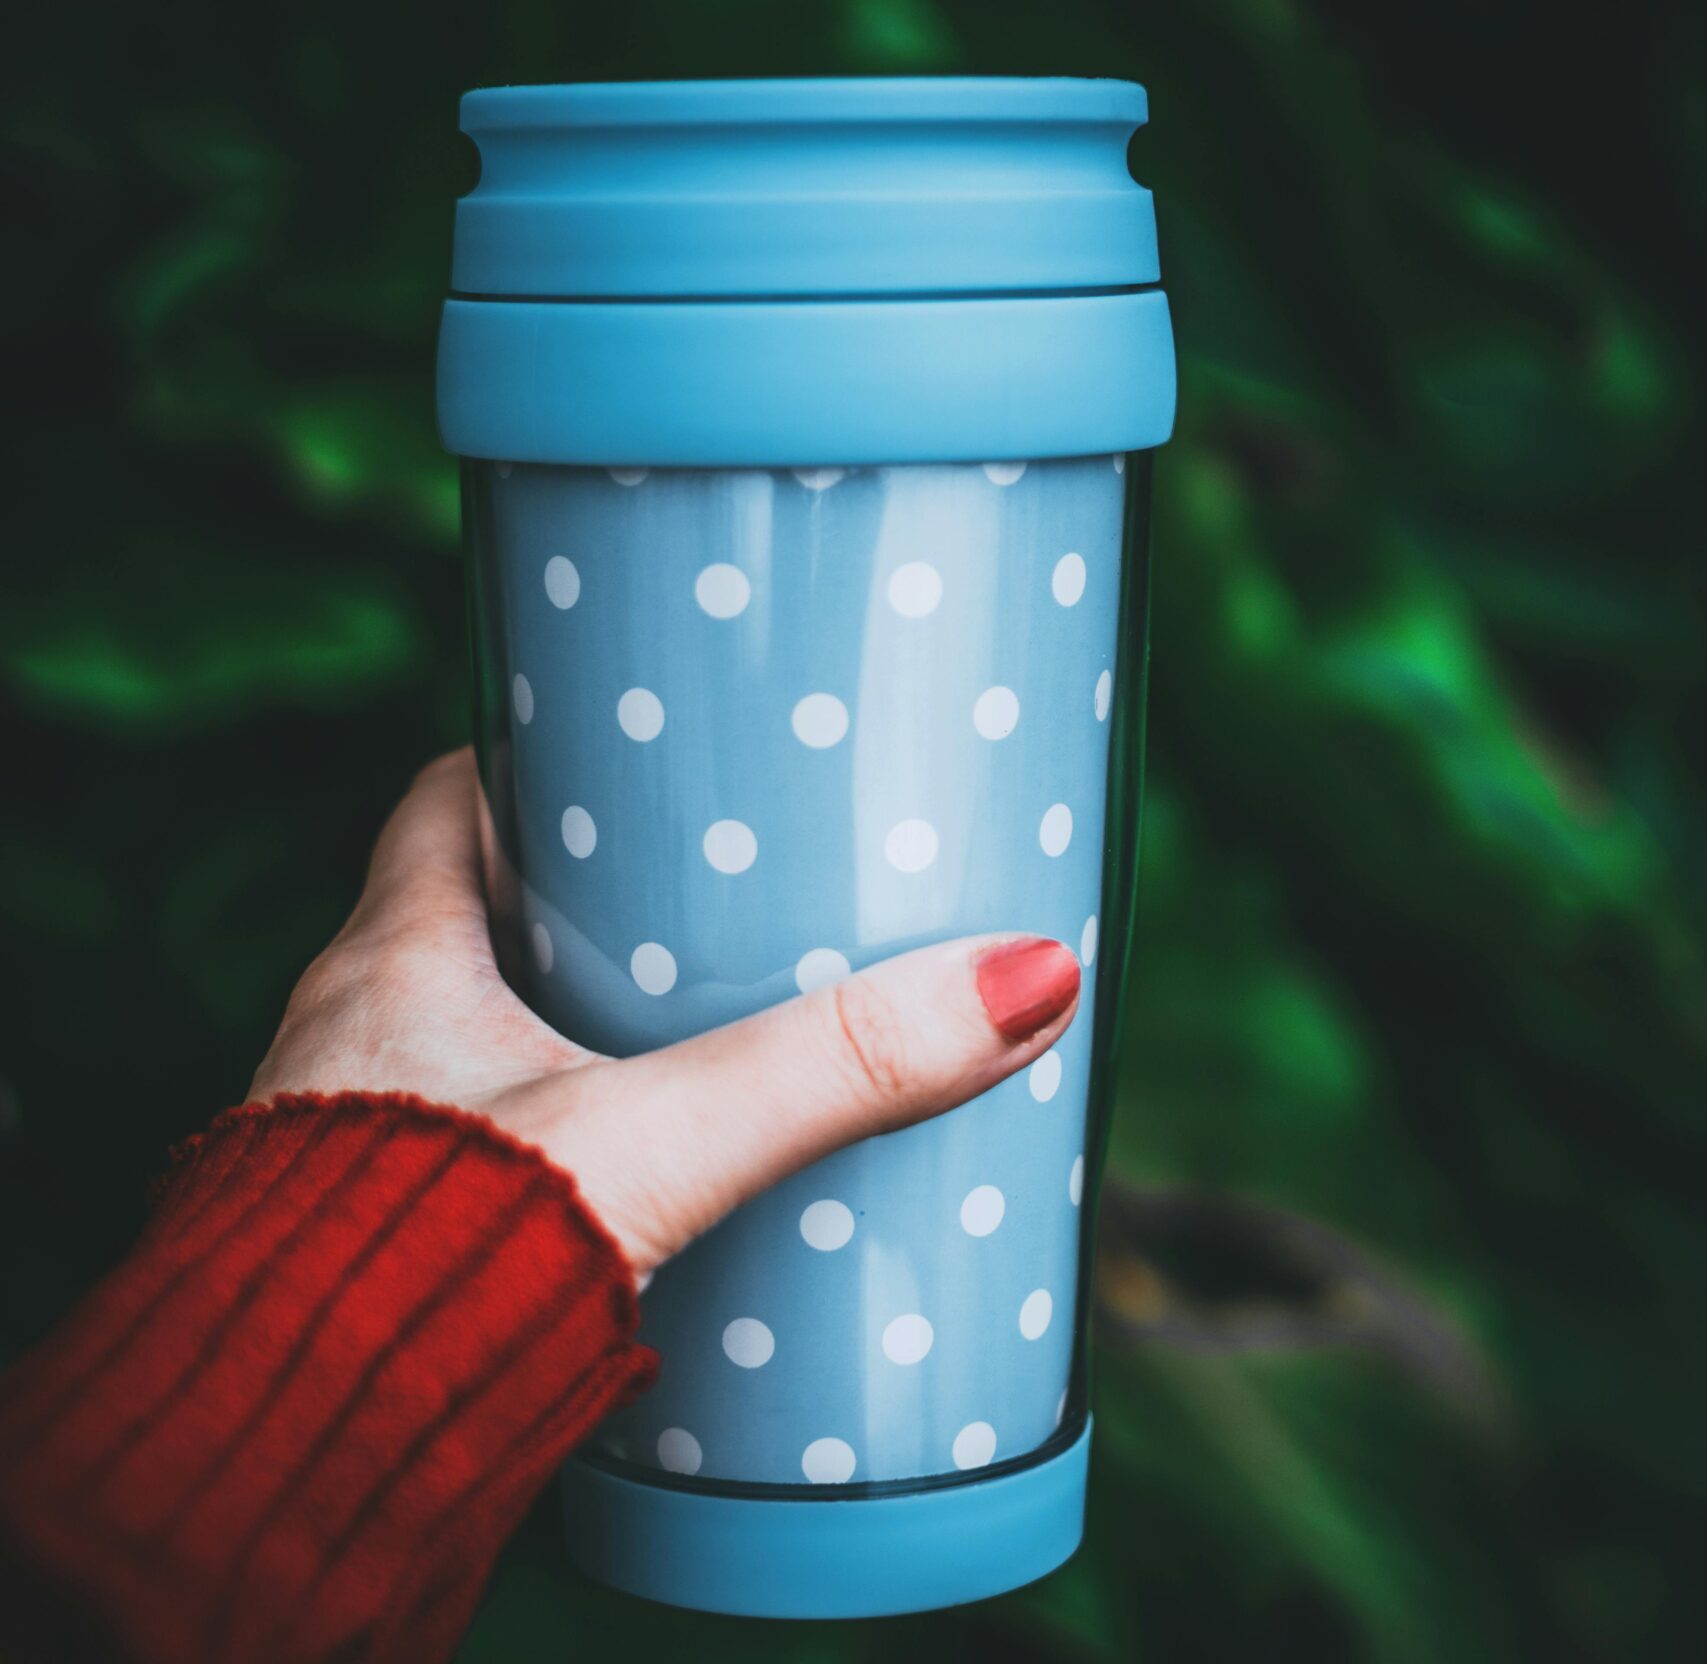 Travel mugs are handy for drinking coffee on the go, while many coffee retailers now incentivise their use with discounts.